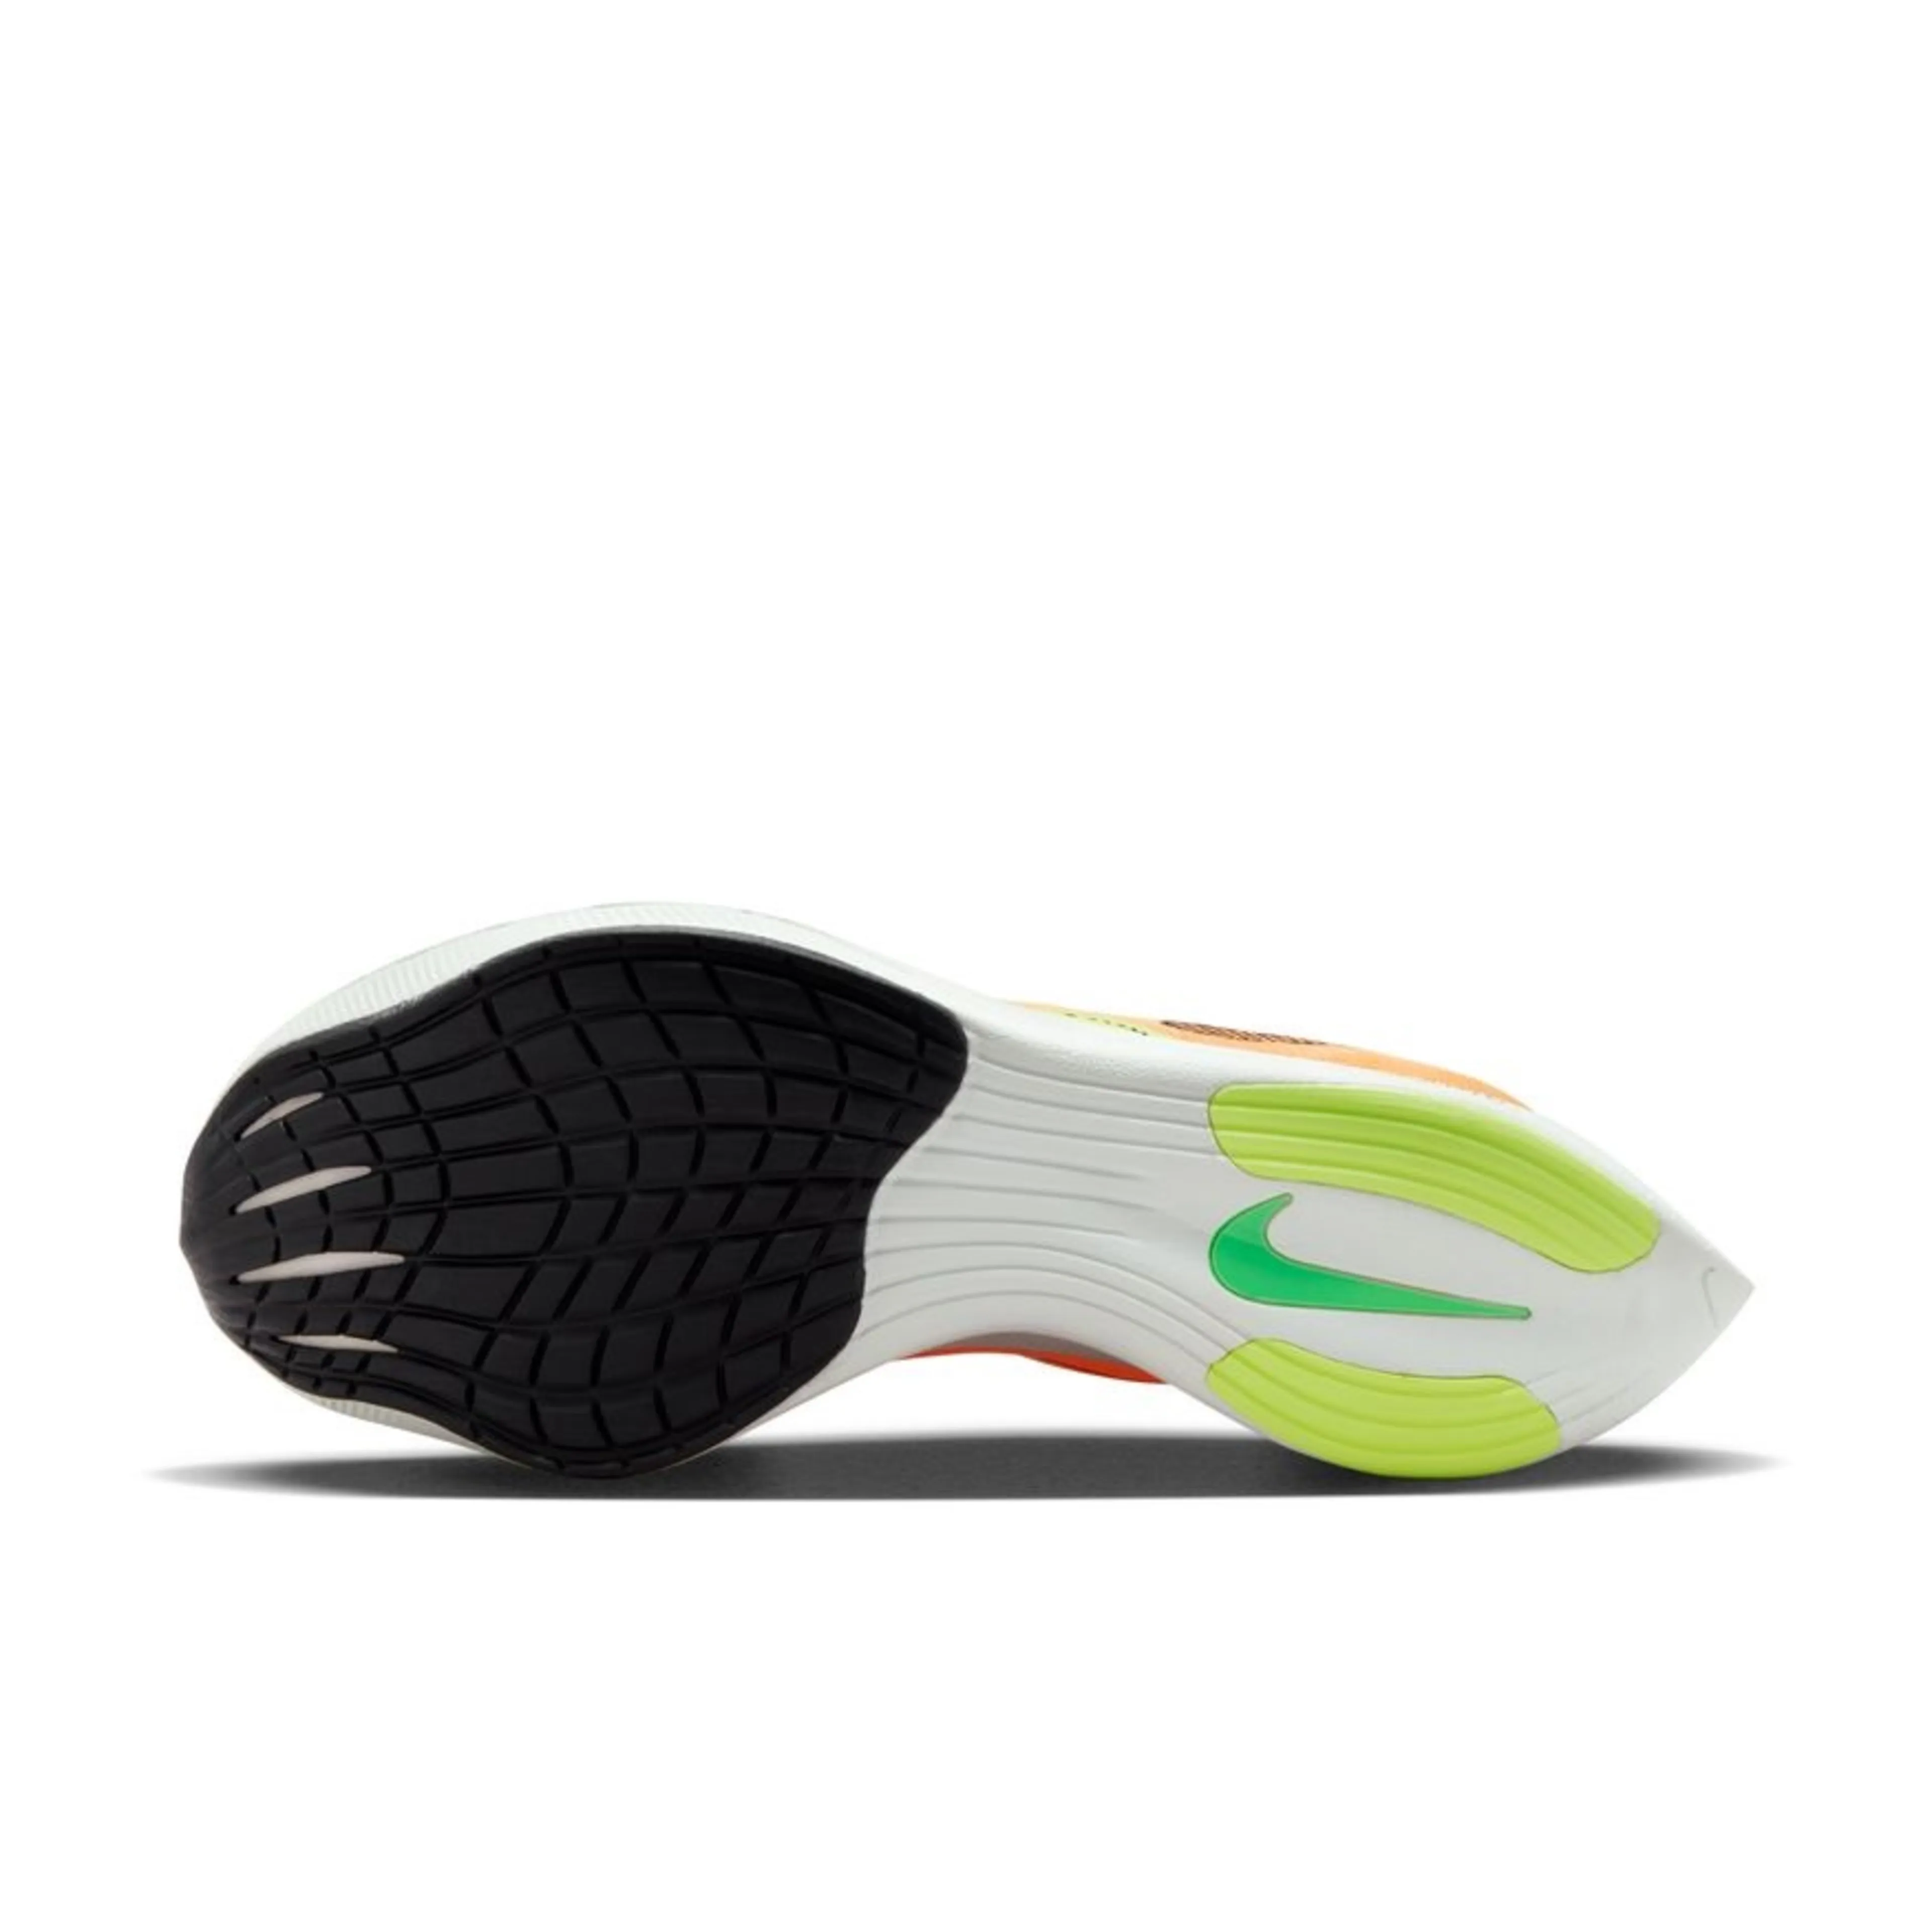 ZoomX Vaporfly Next% 2, dame